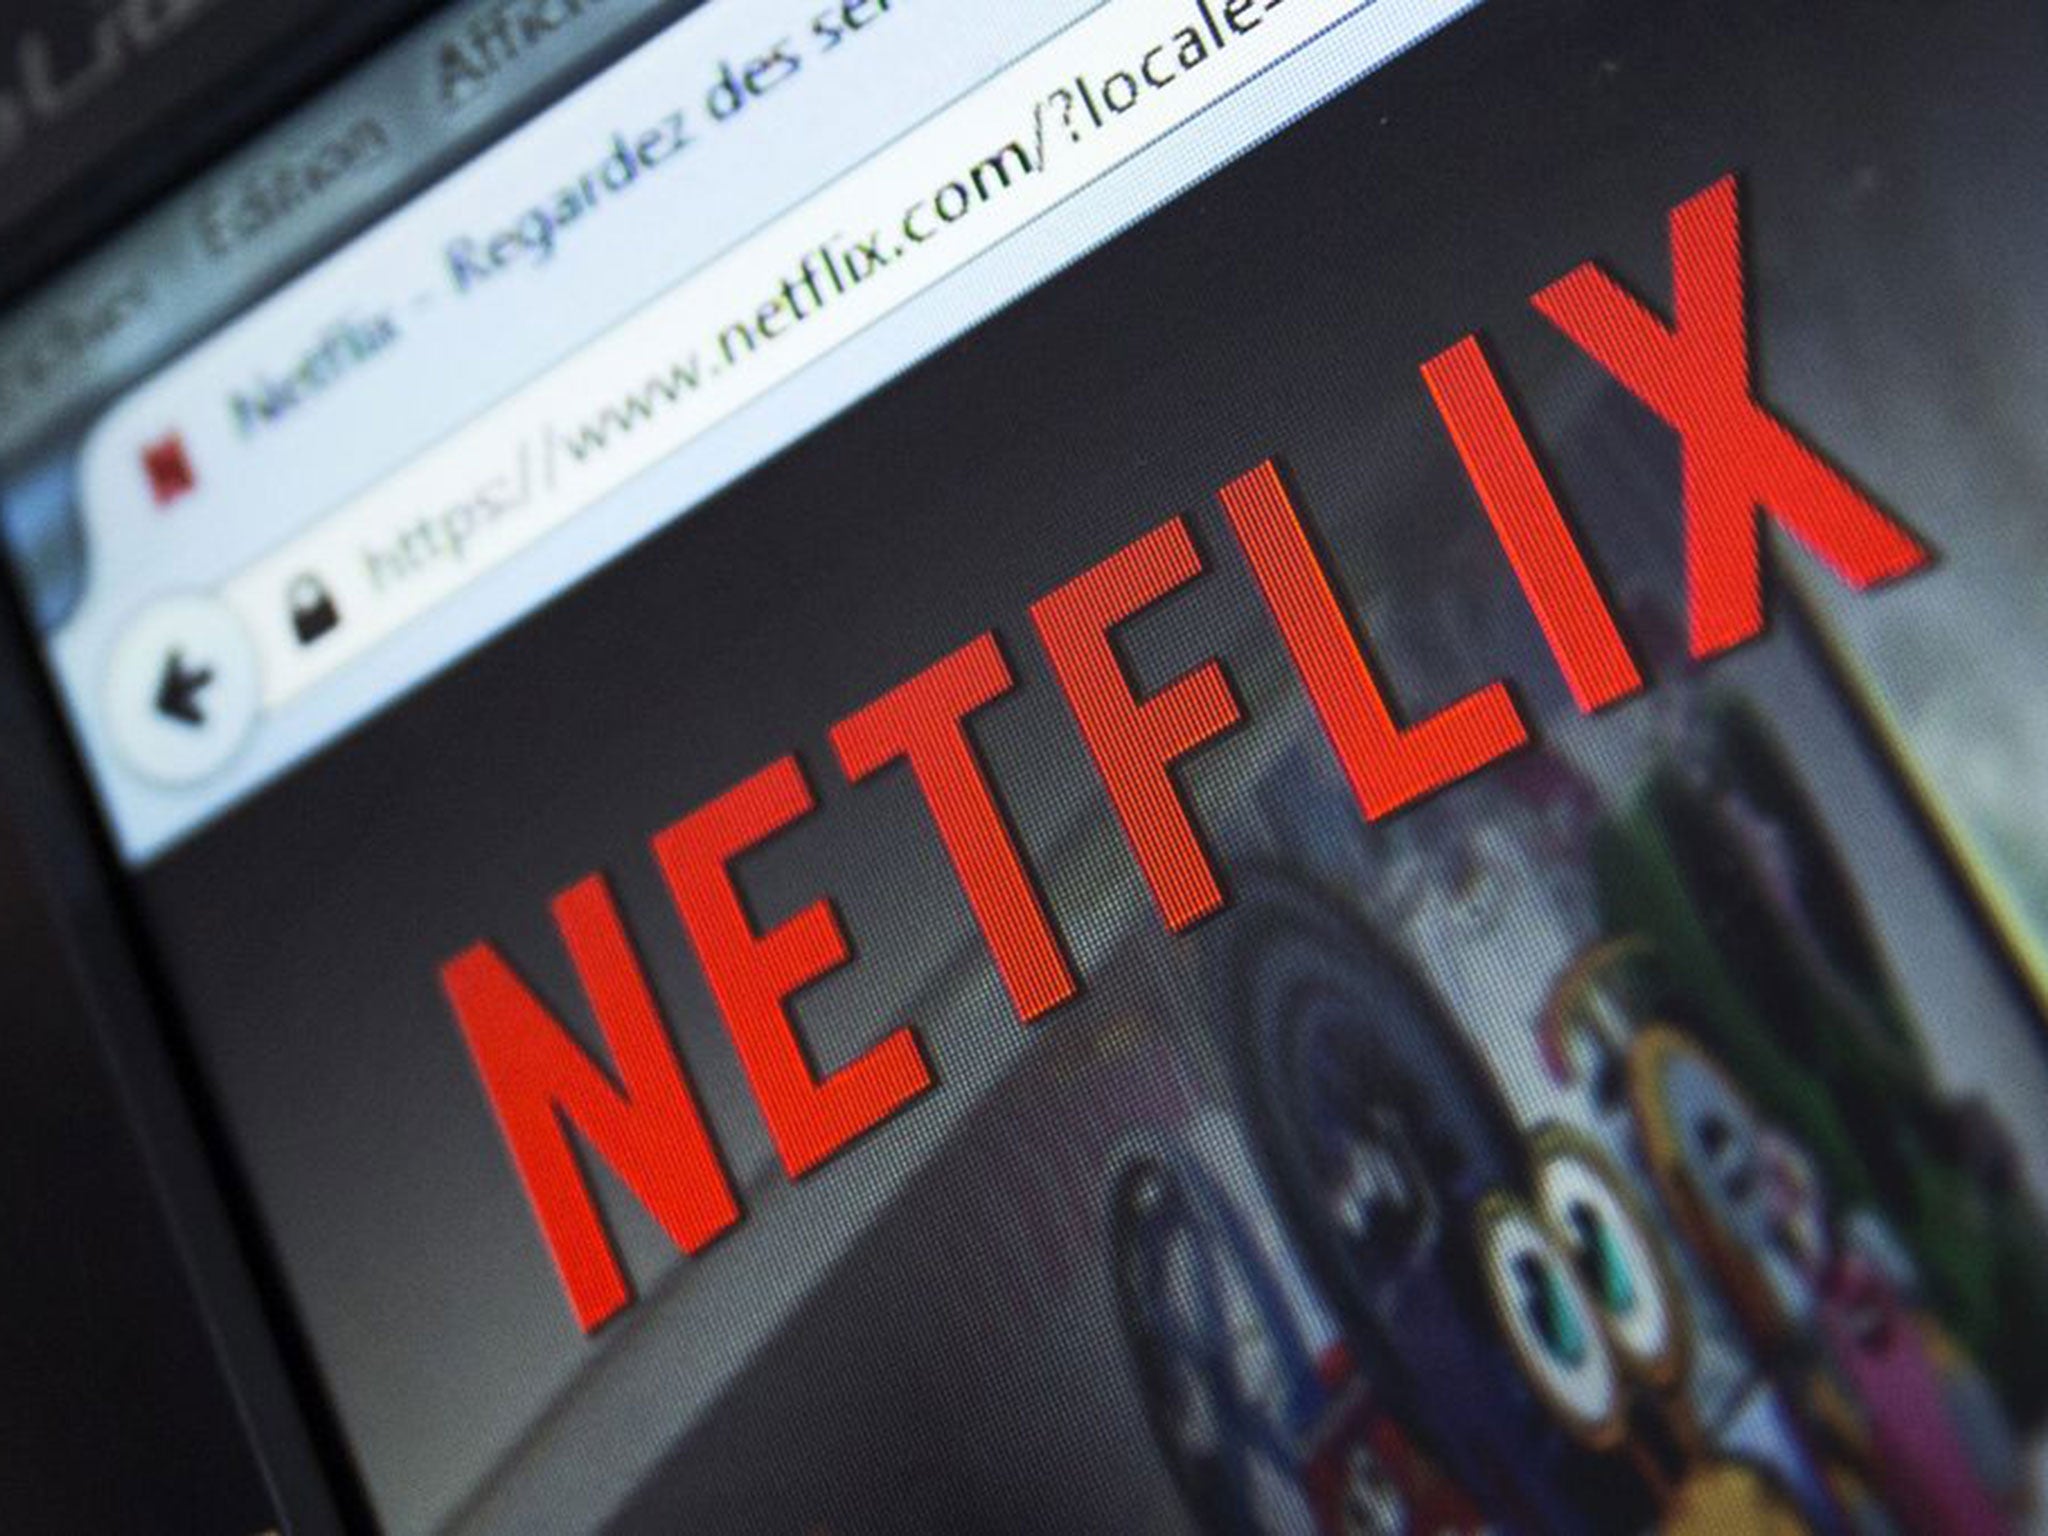 French television companies and film-makers are concerned that Netflix will be able to escape rules on minimum French-language content by basing its European operations in the Netherlands